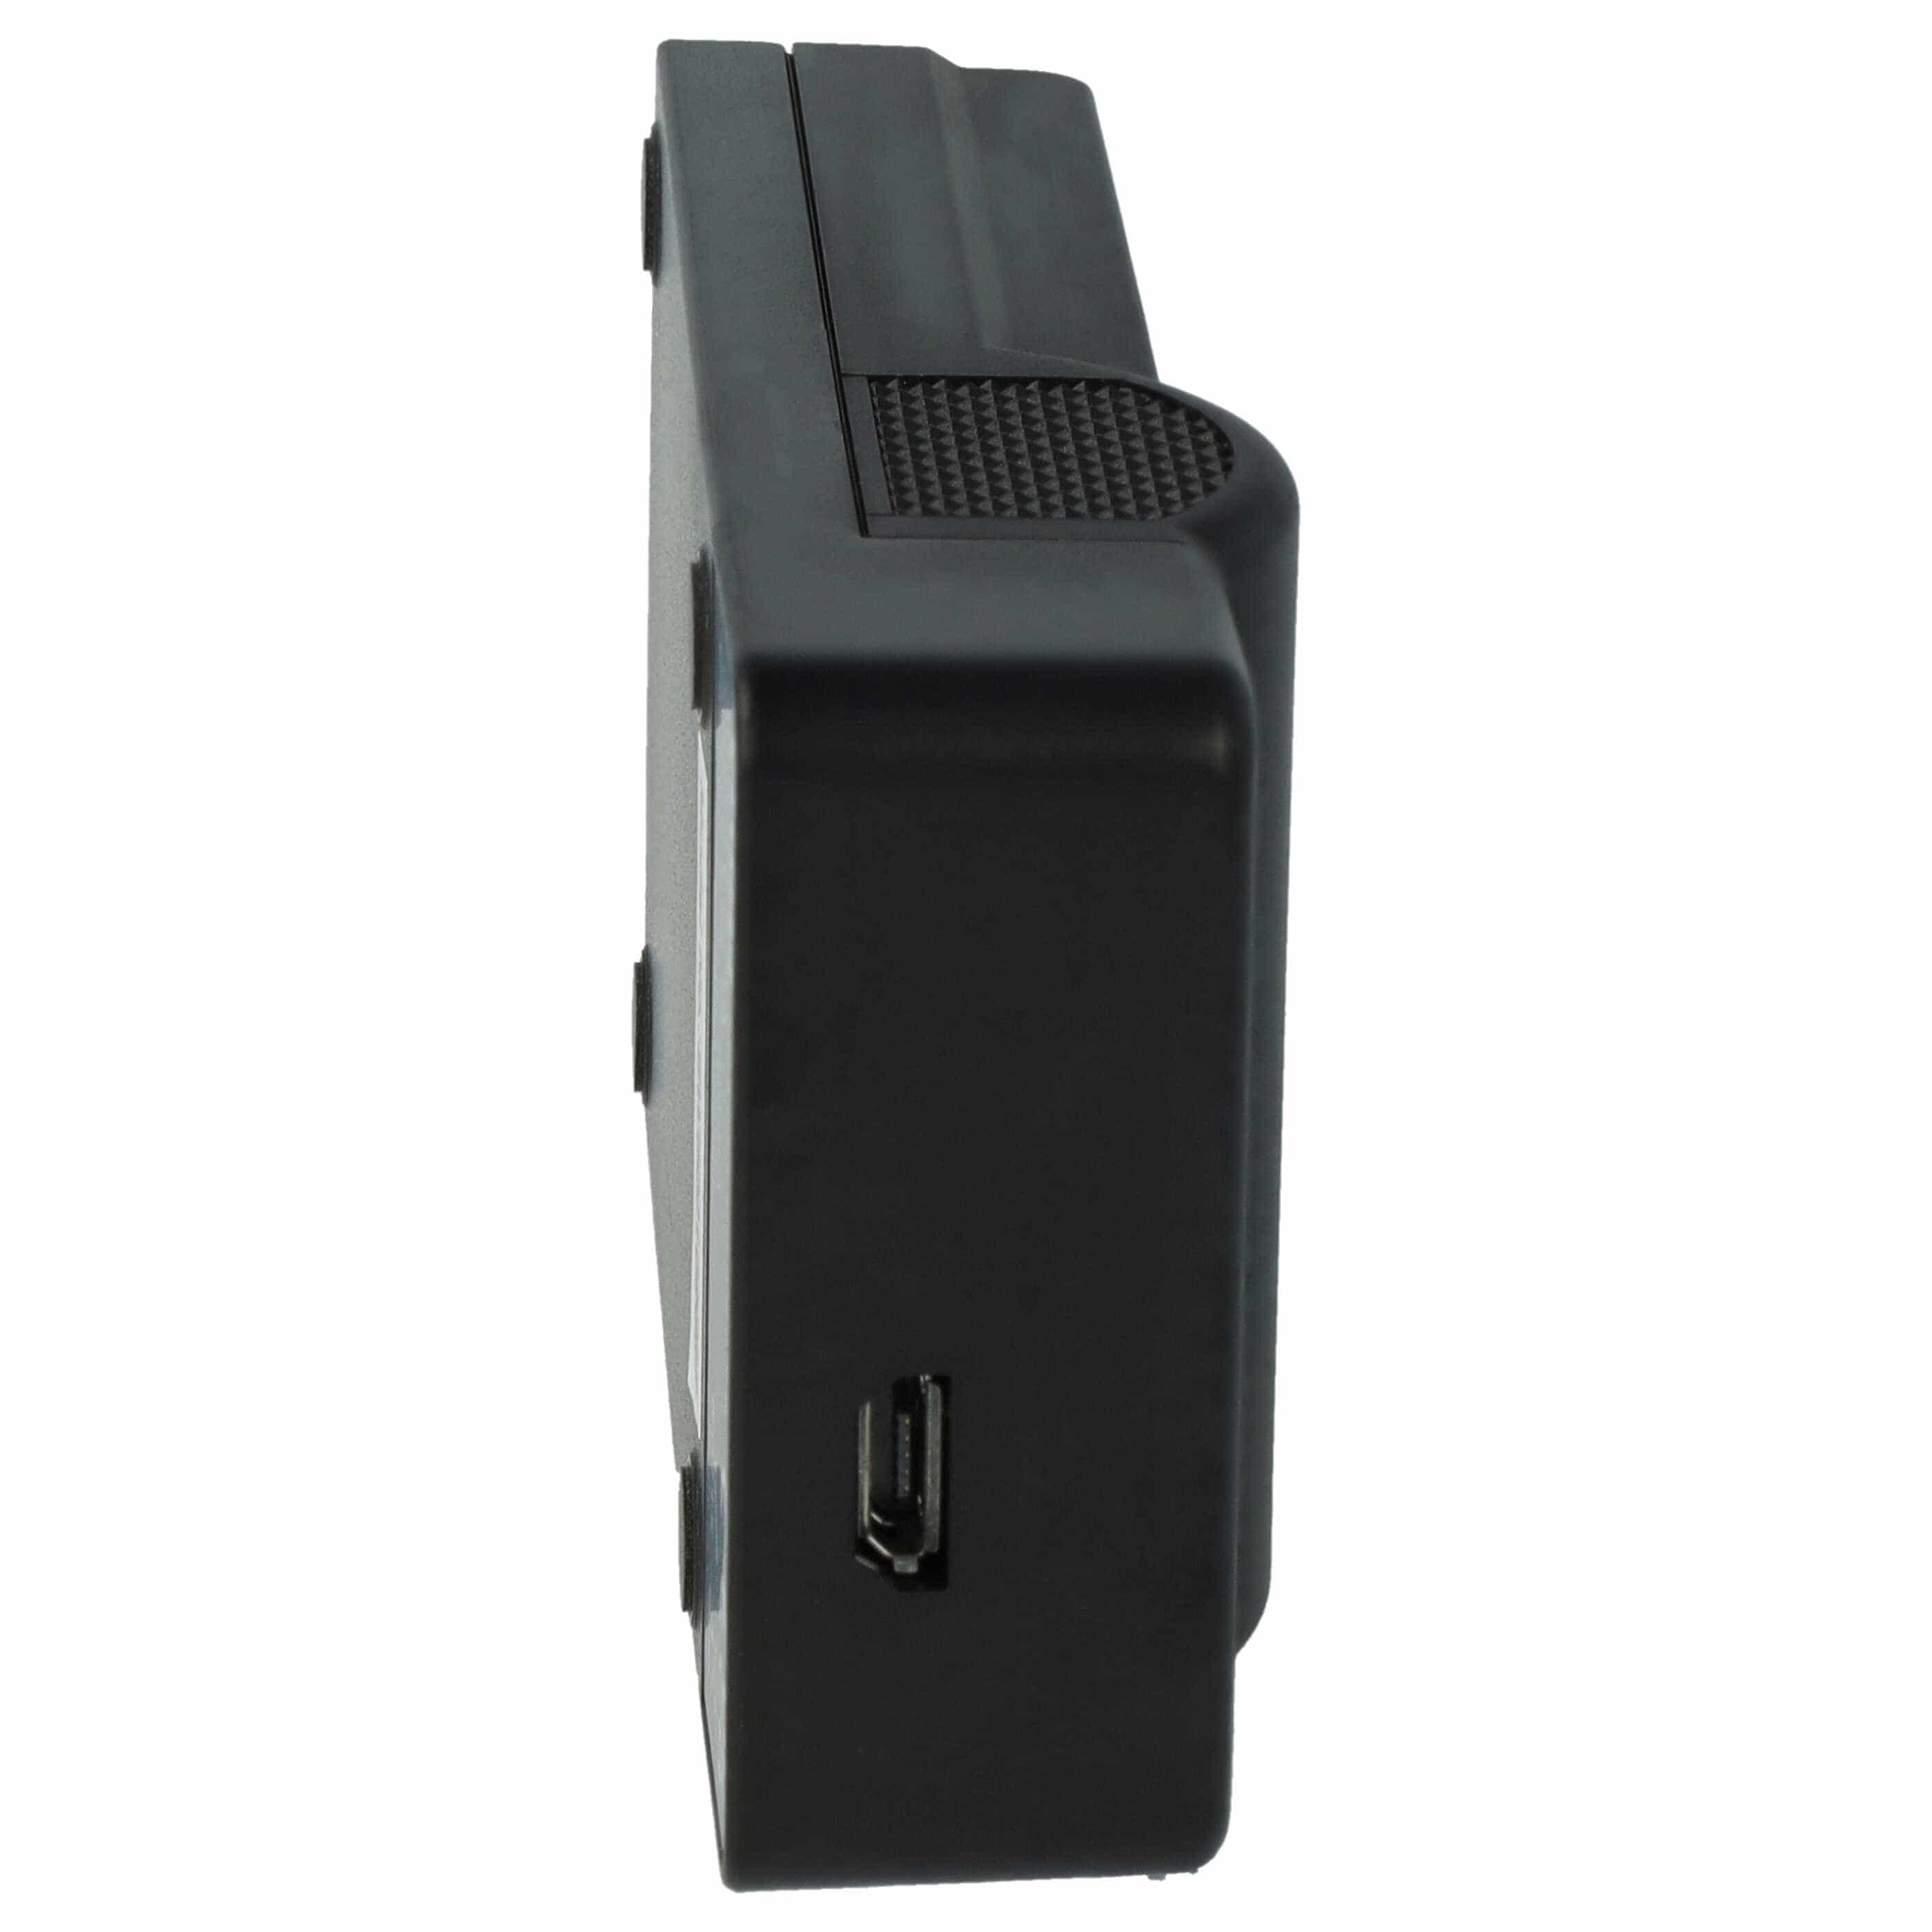 Battery Charger suitable for Toshiba Digital Camera - 0.5 A, 4.2 V